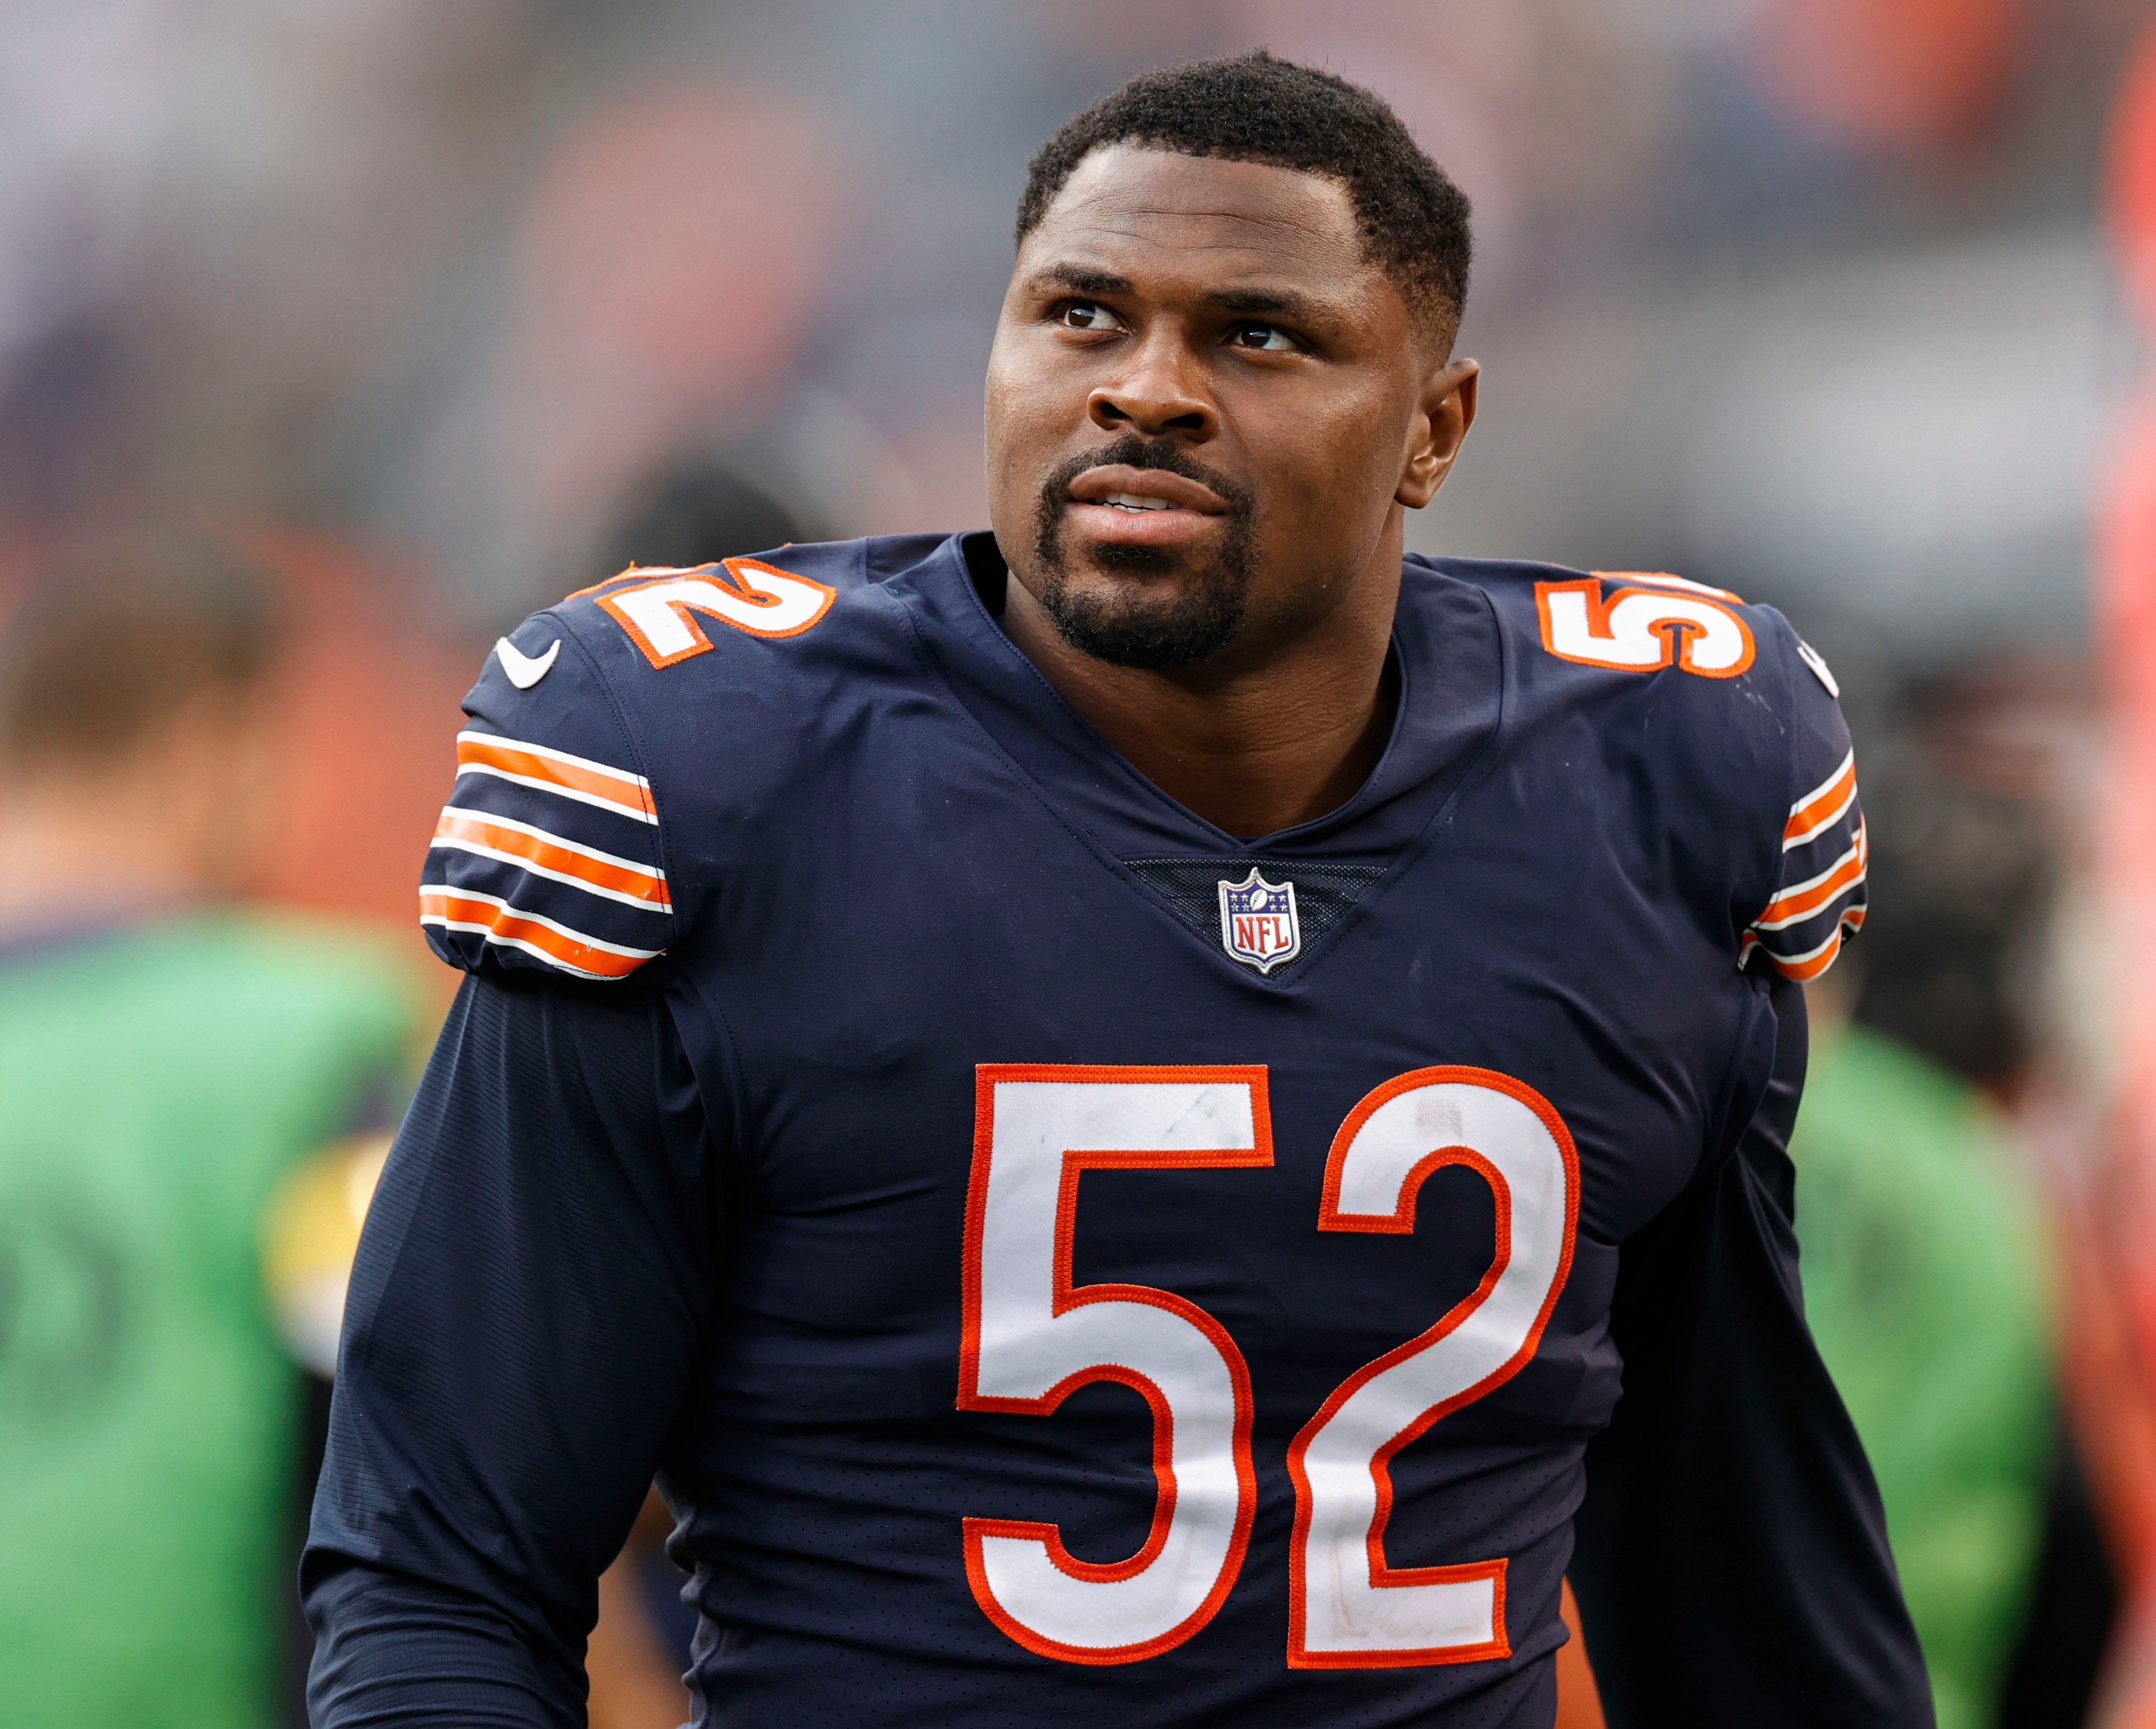 OLB Khalil Mack: Traded to Chargers (previous team: Bears)